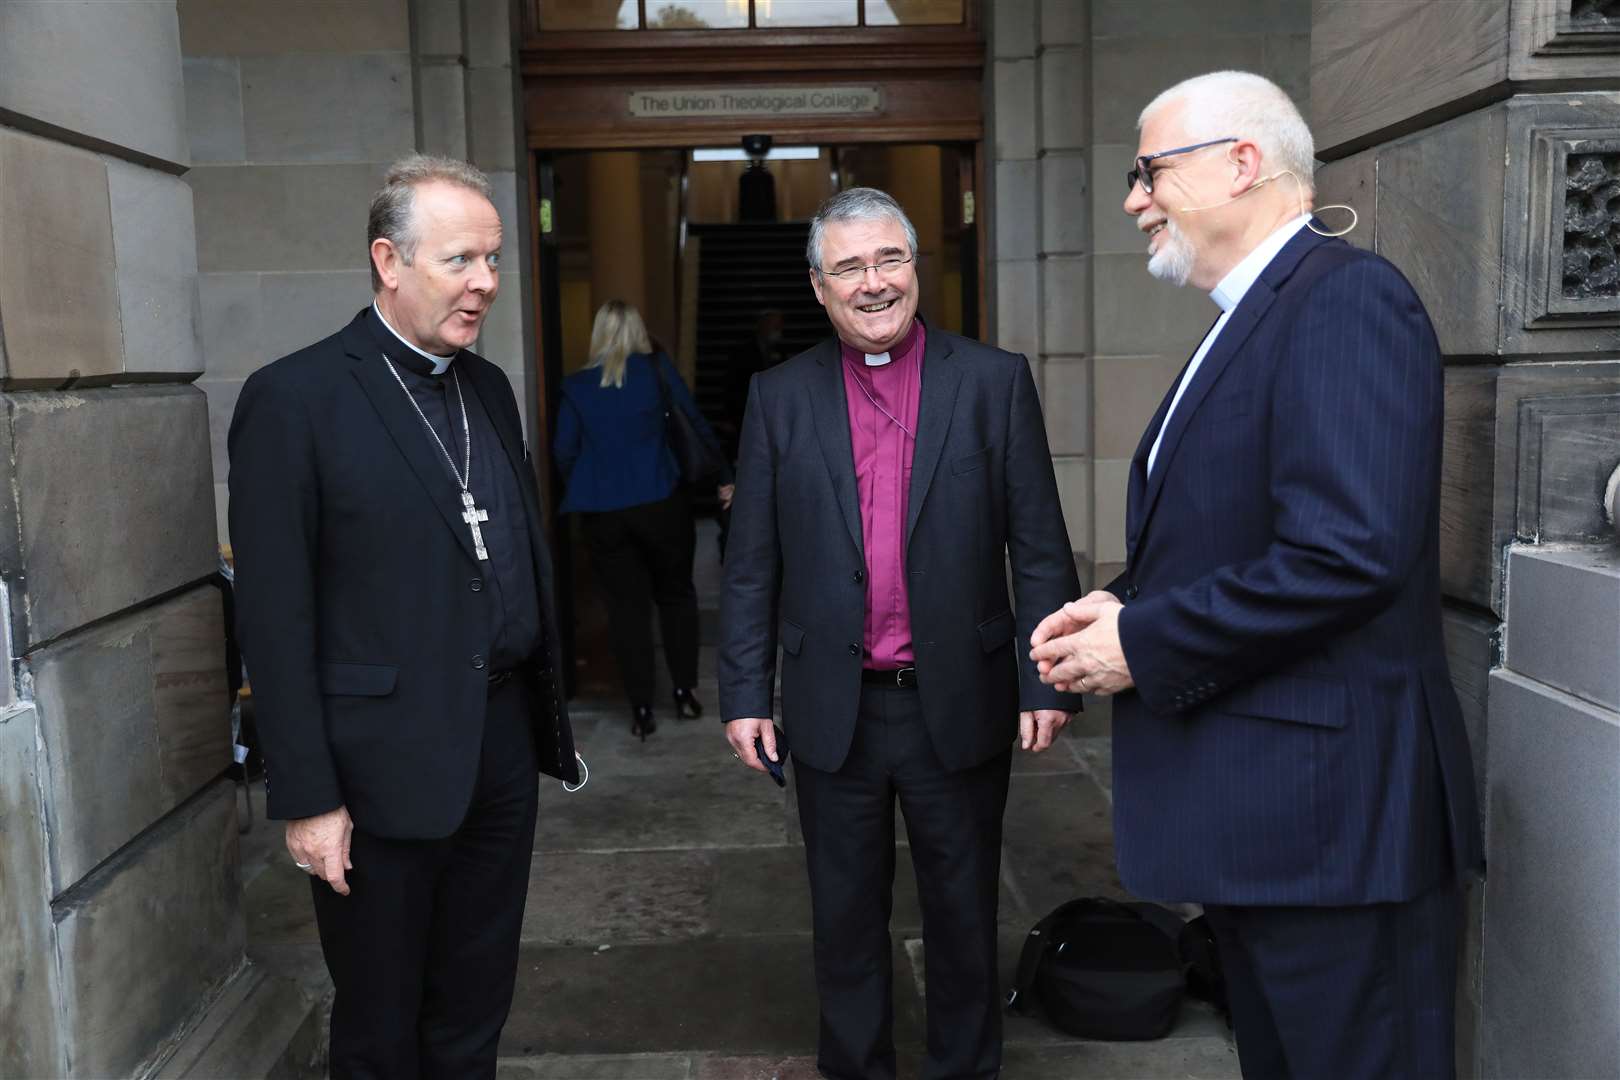 Archbishop Eamon Martin, Archbishop John McDowell and the Rev David Bruce attended (PA)